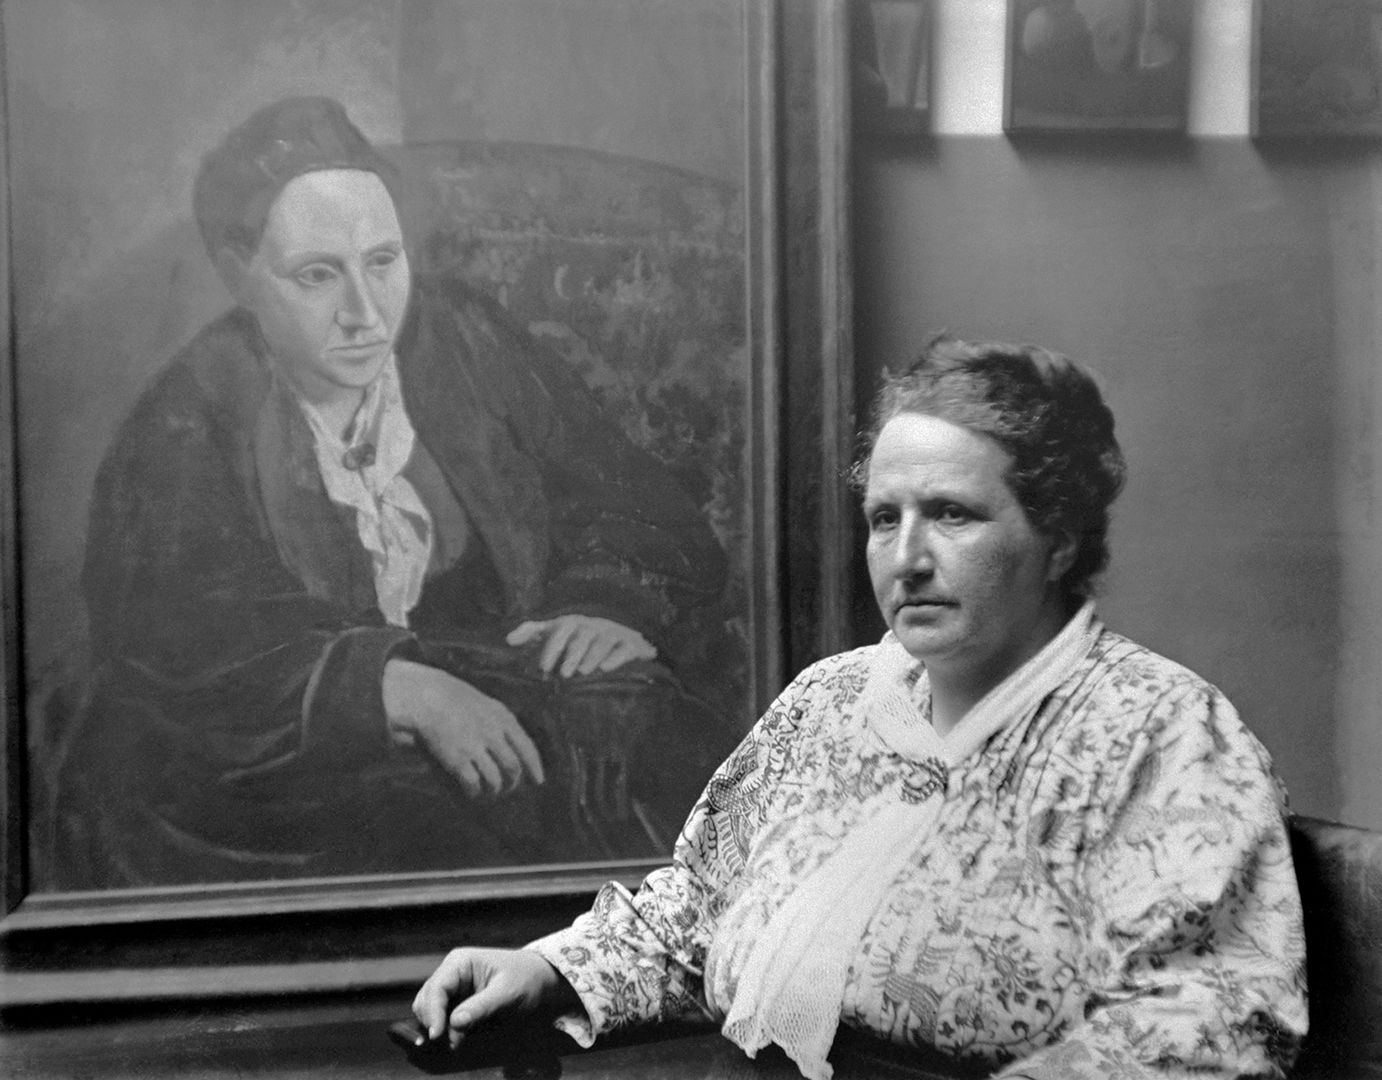 Black and white photograph of a woman wearing a white floral pattern outfit on the right with a potrait in the background done by Picasso of her. 